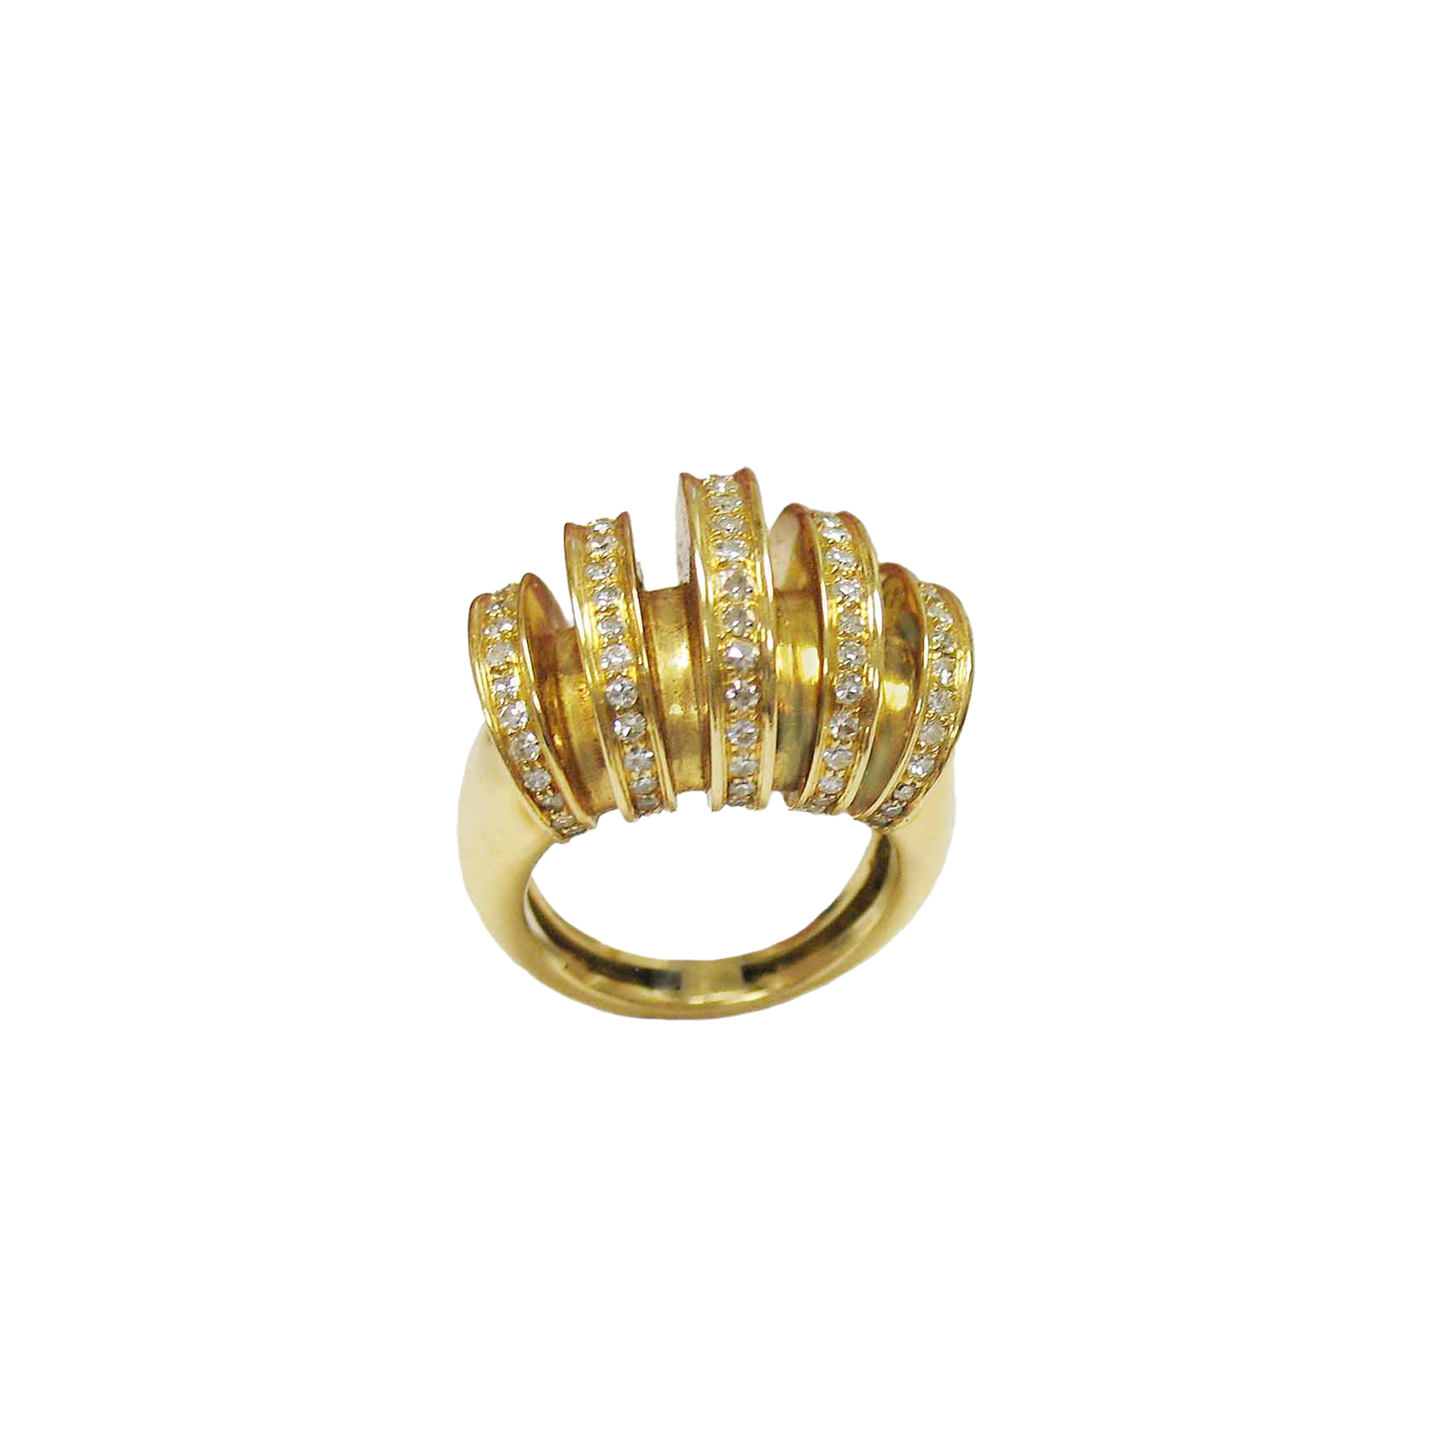 Post-1980s 18kt Yellow Gold & Diamond Cartier ring. Side view on white background